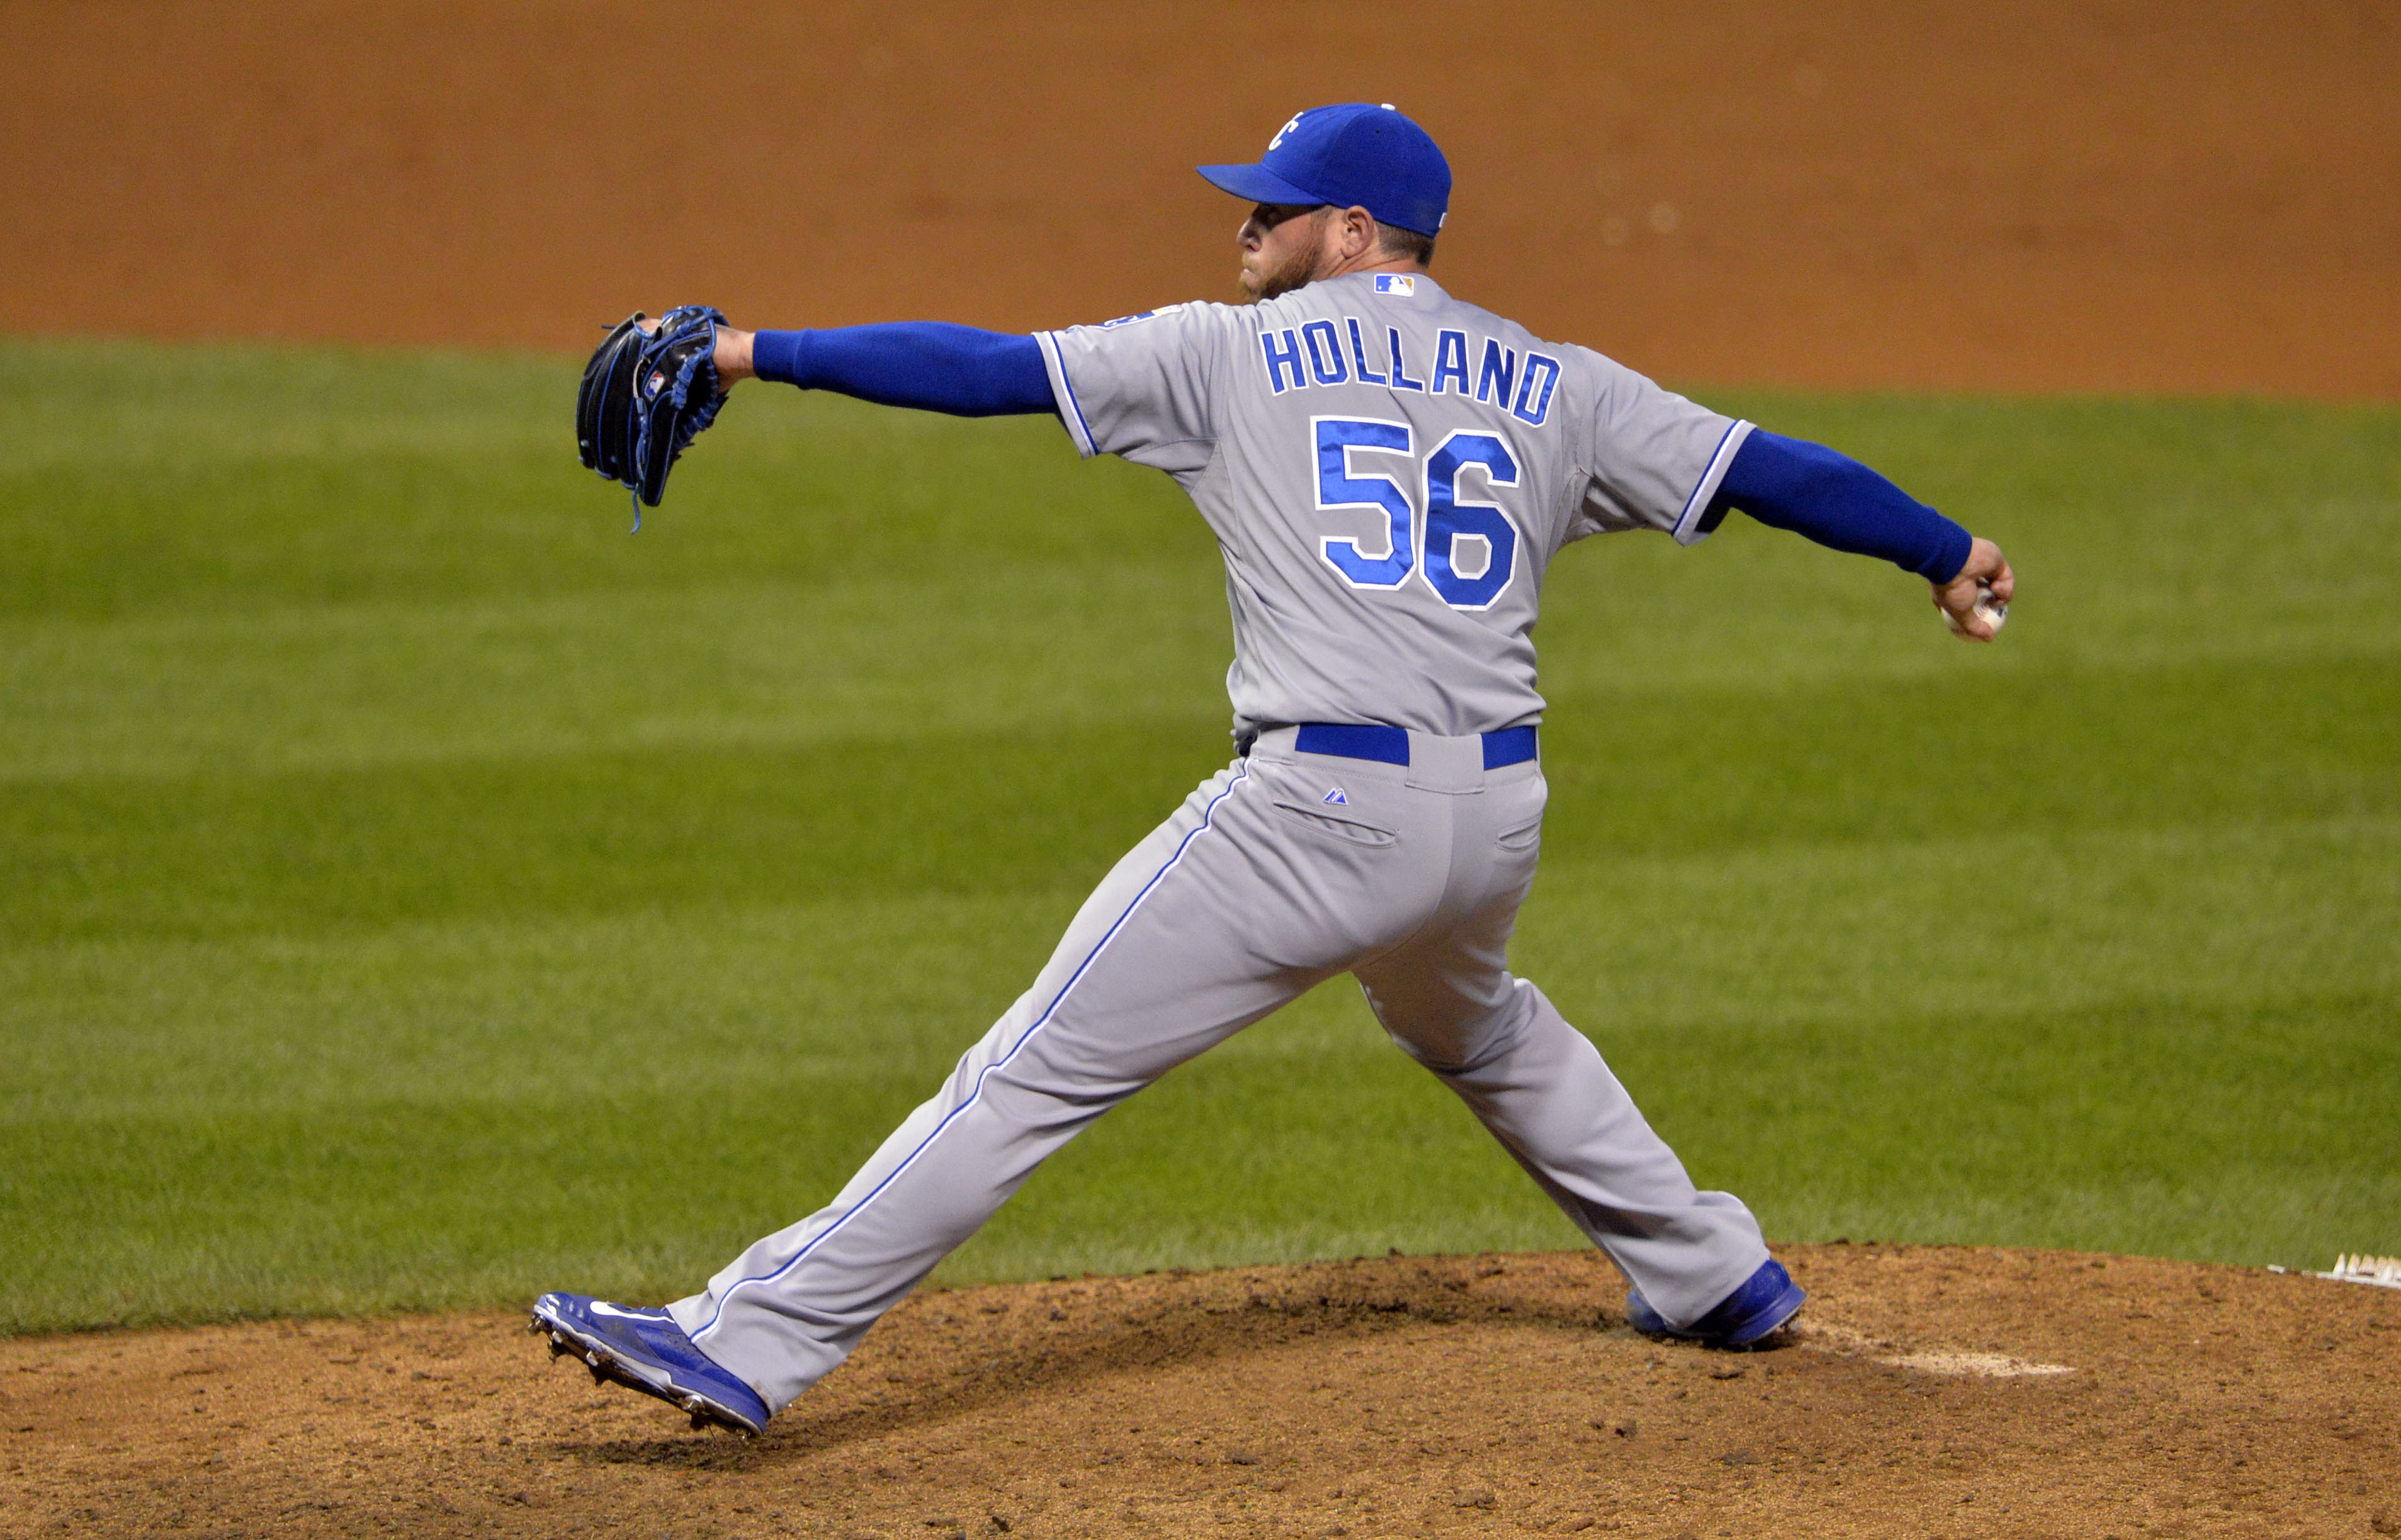 New York Yankees Plan To Send Scouts To Greg Holland Showcase (Report) 